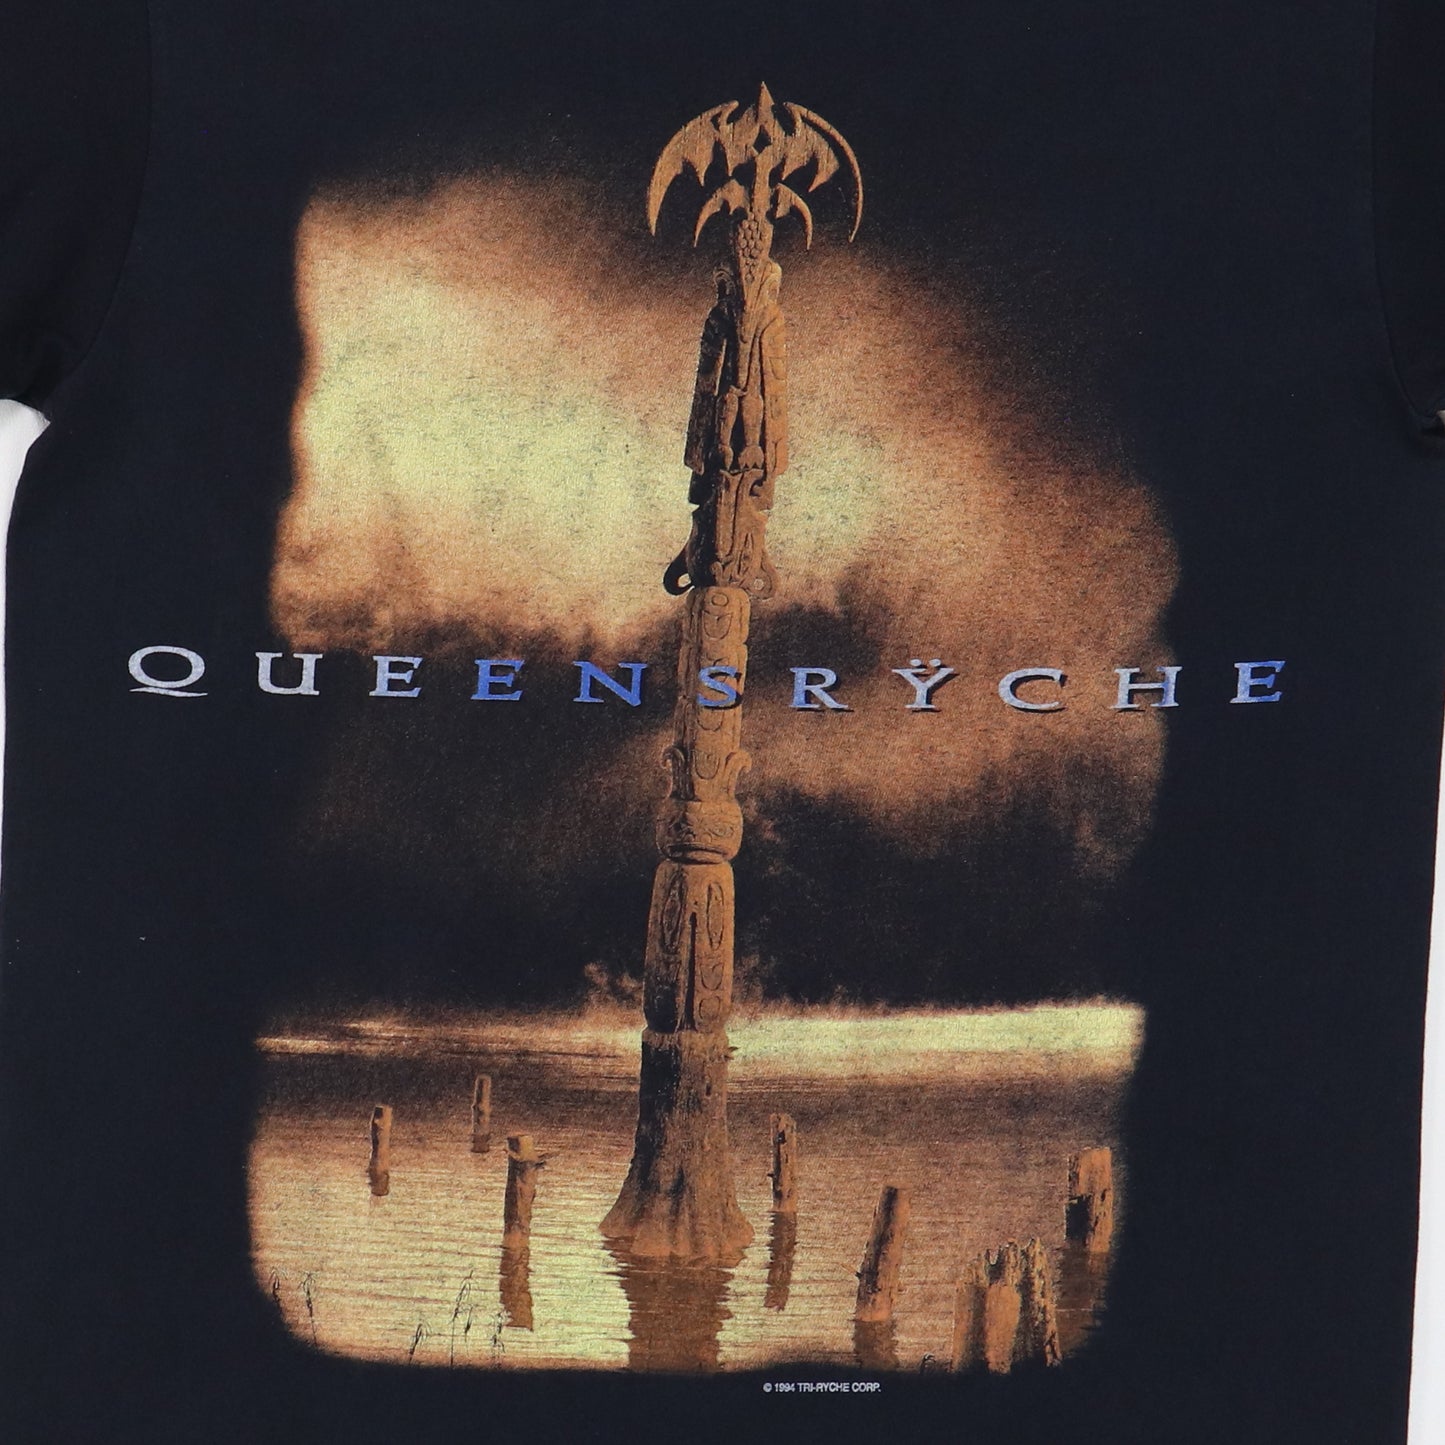 1994 Queensryche Promised Land Tour Shirt